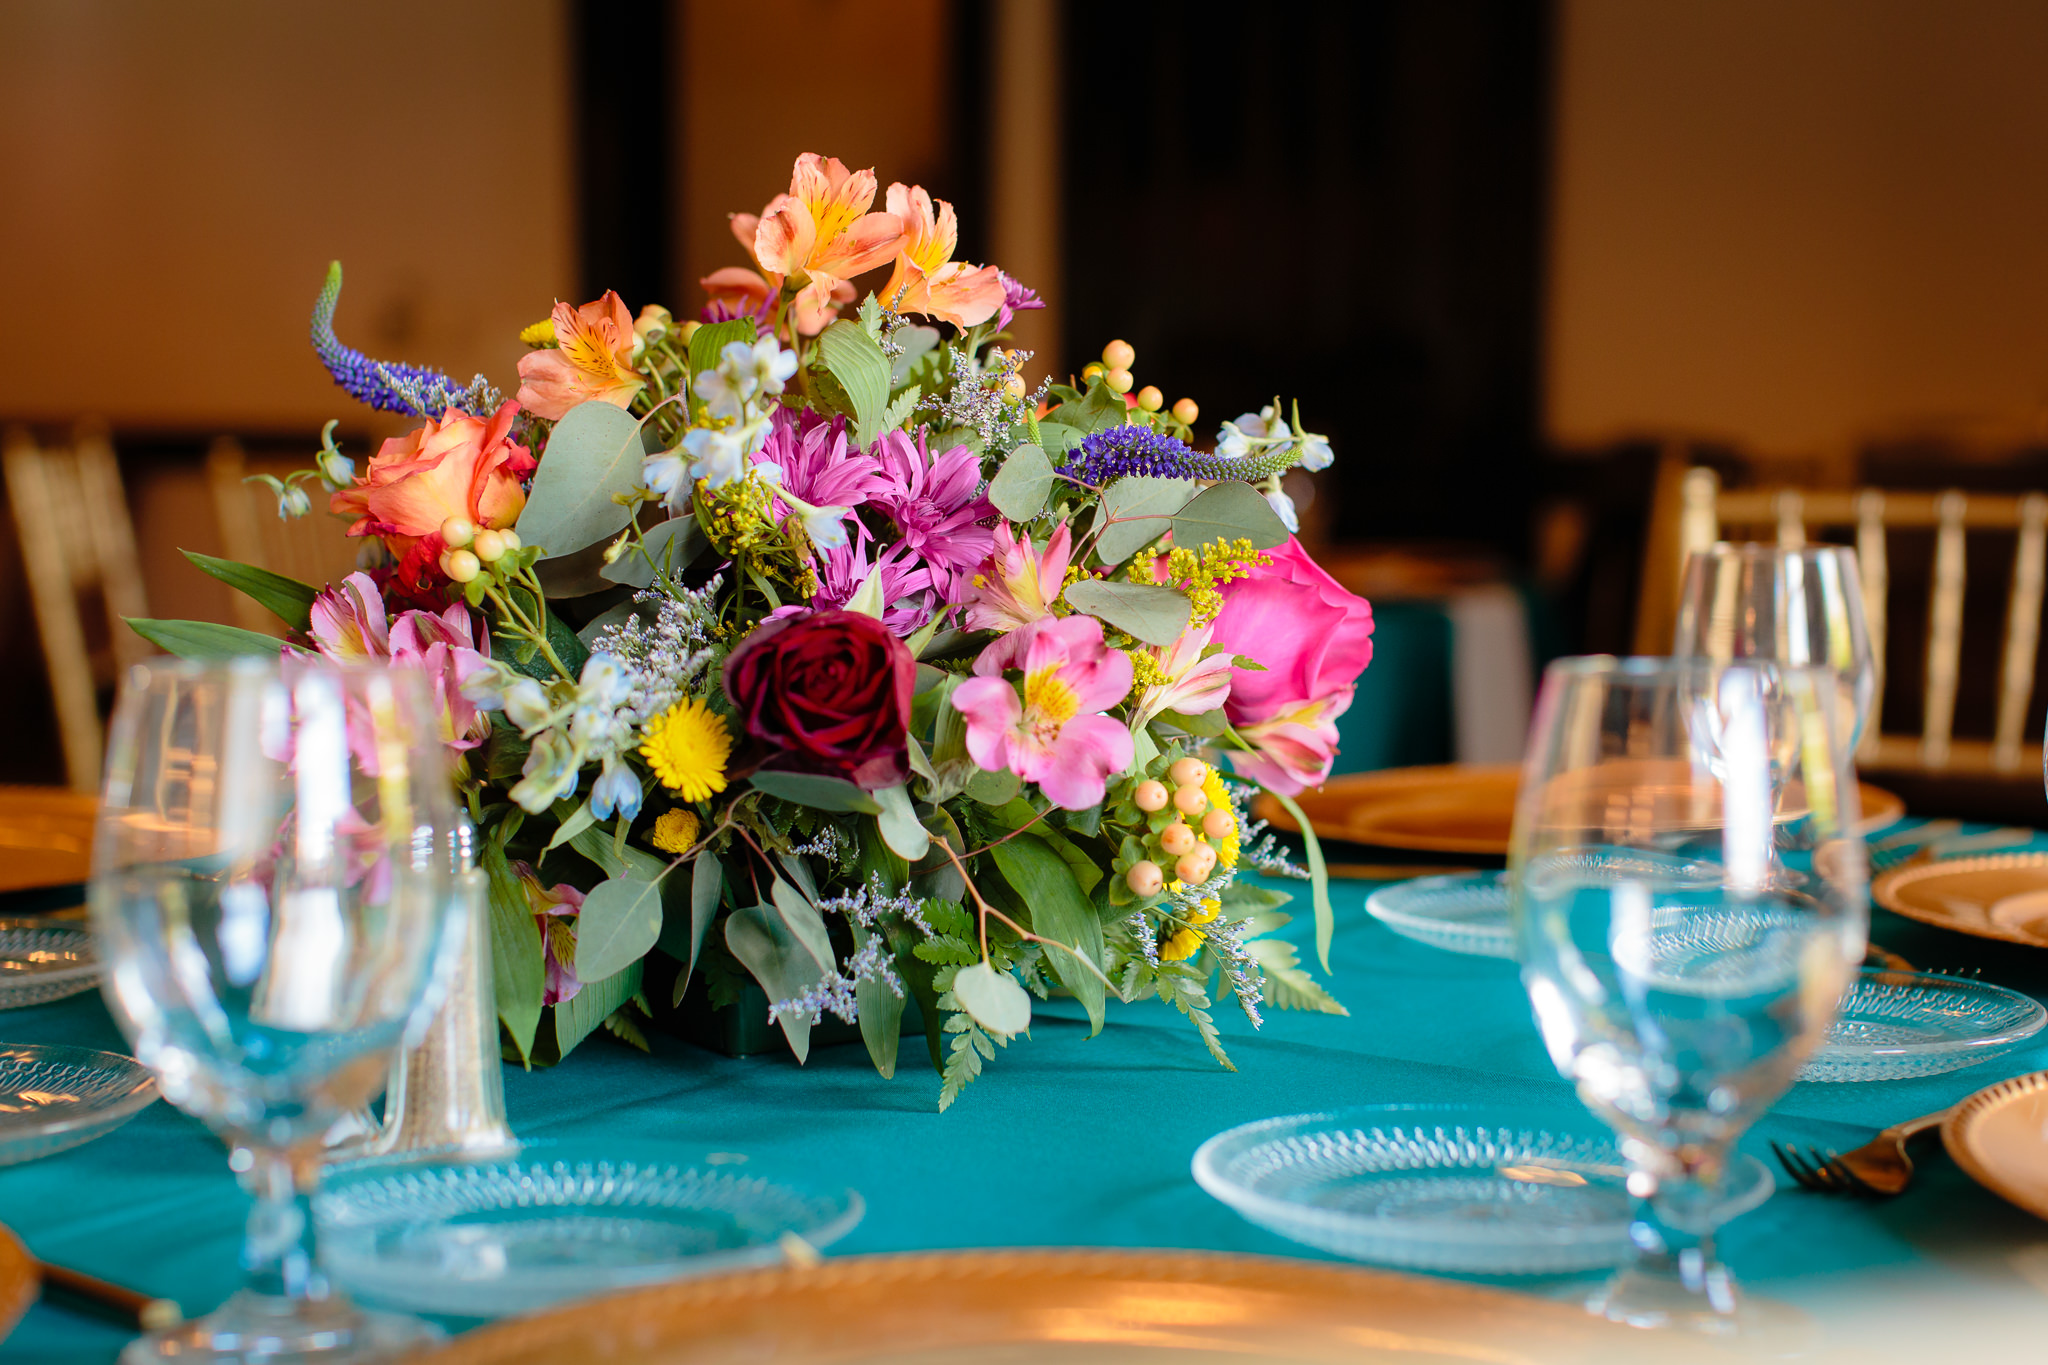 Patti's Petals Flower Shop designed these floral centerpieces for a Beaver Station wedding